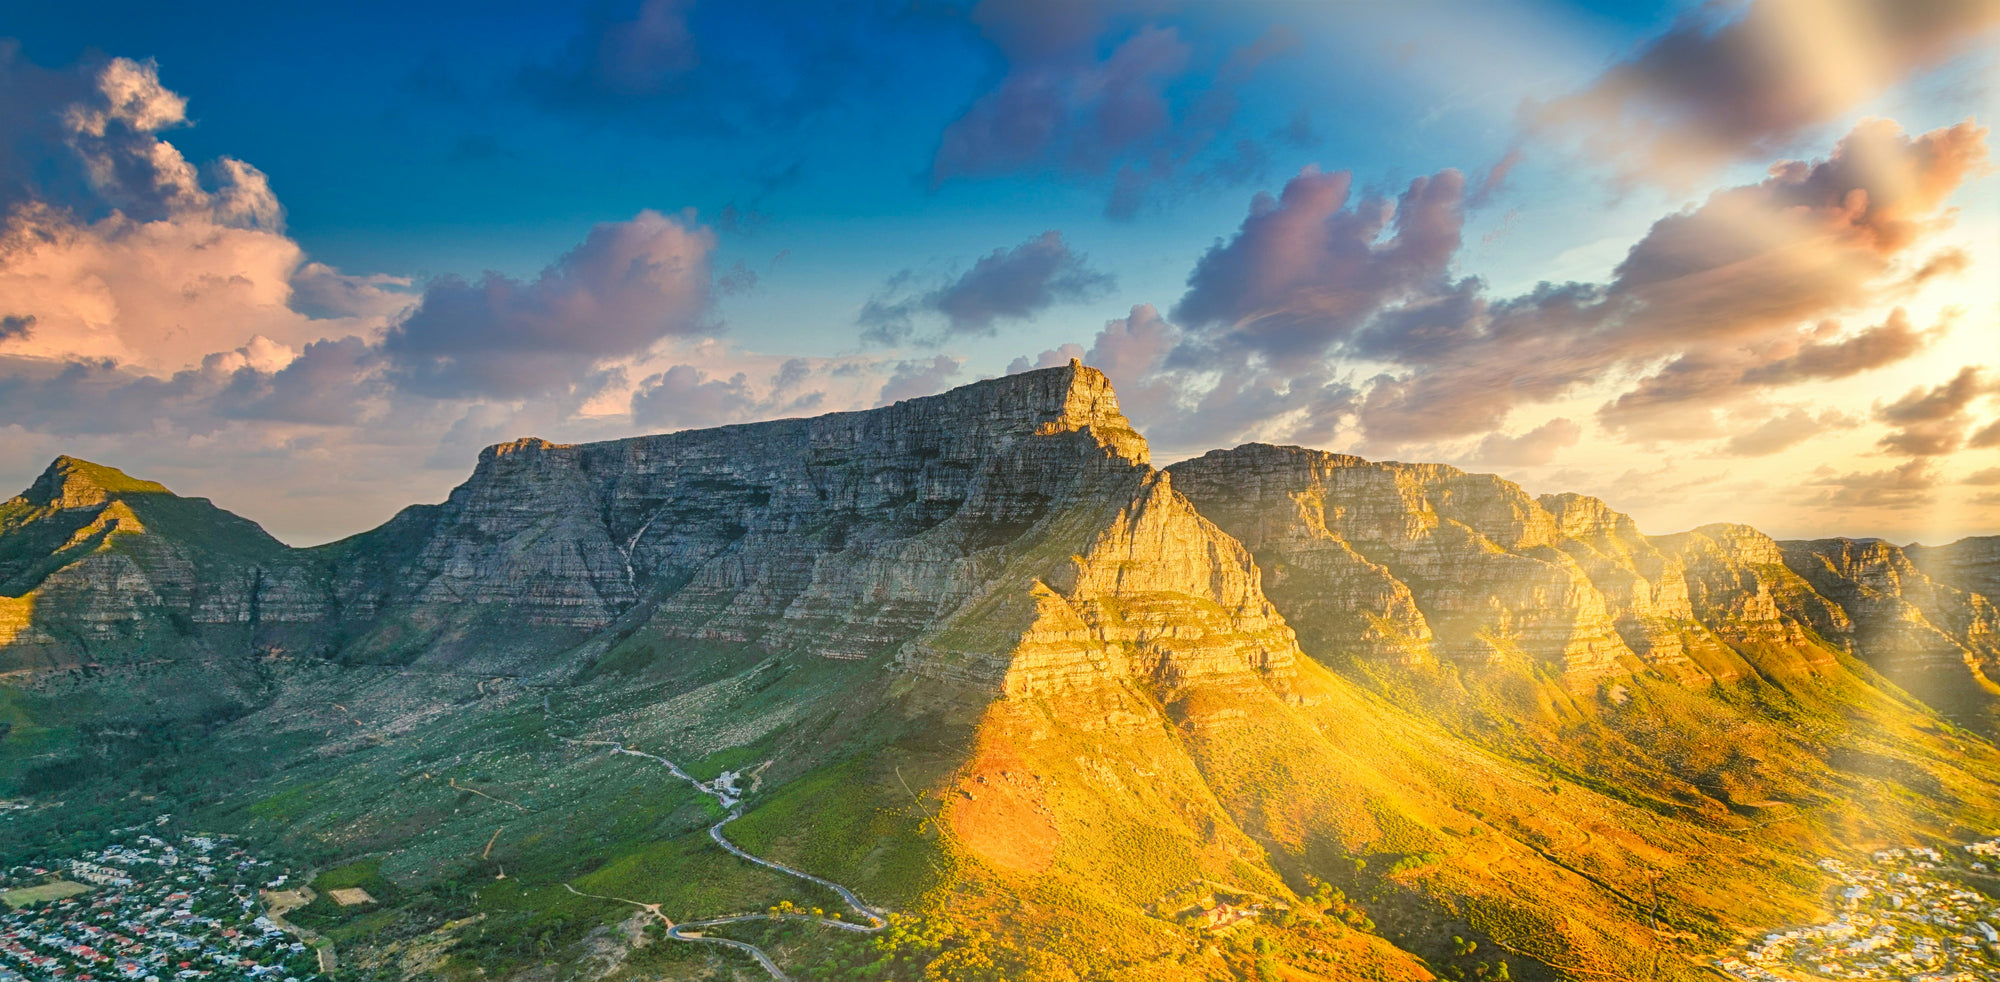 A wide view of the Table mountain with the best running routes during a sunset